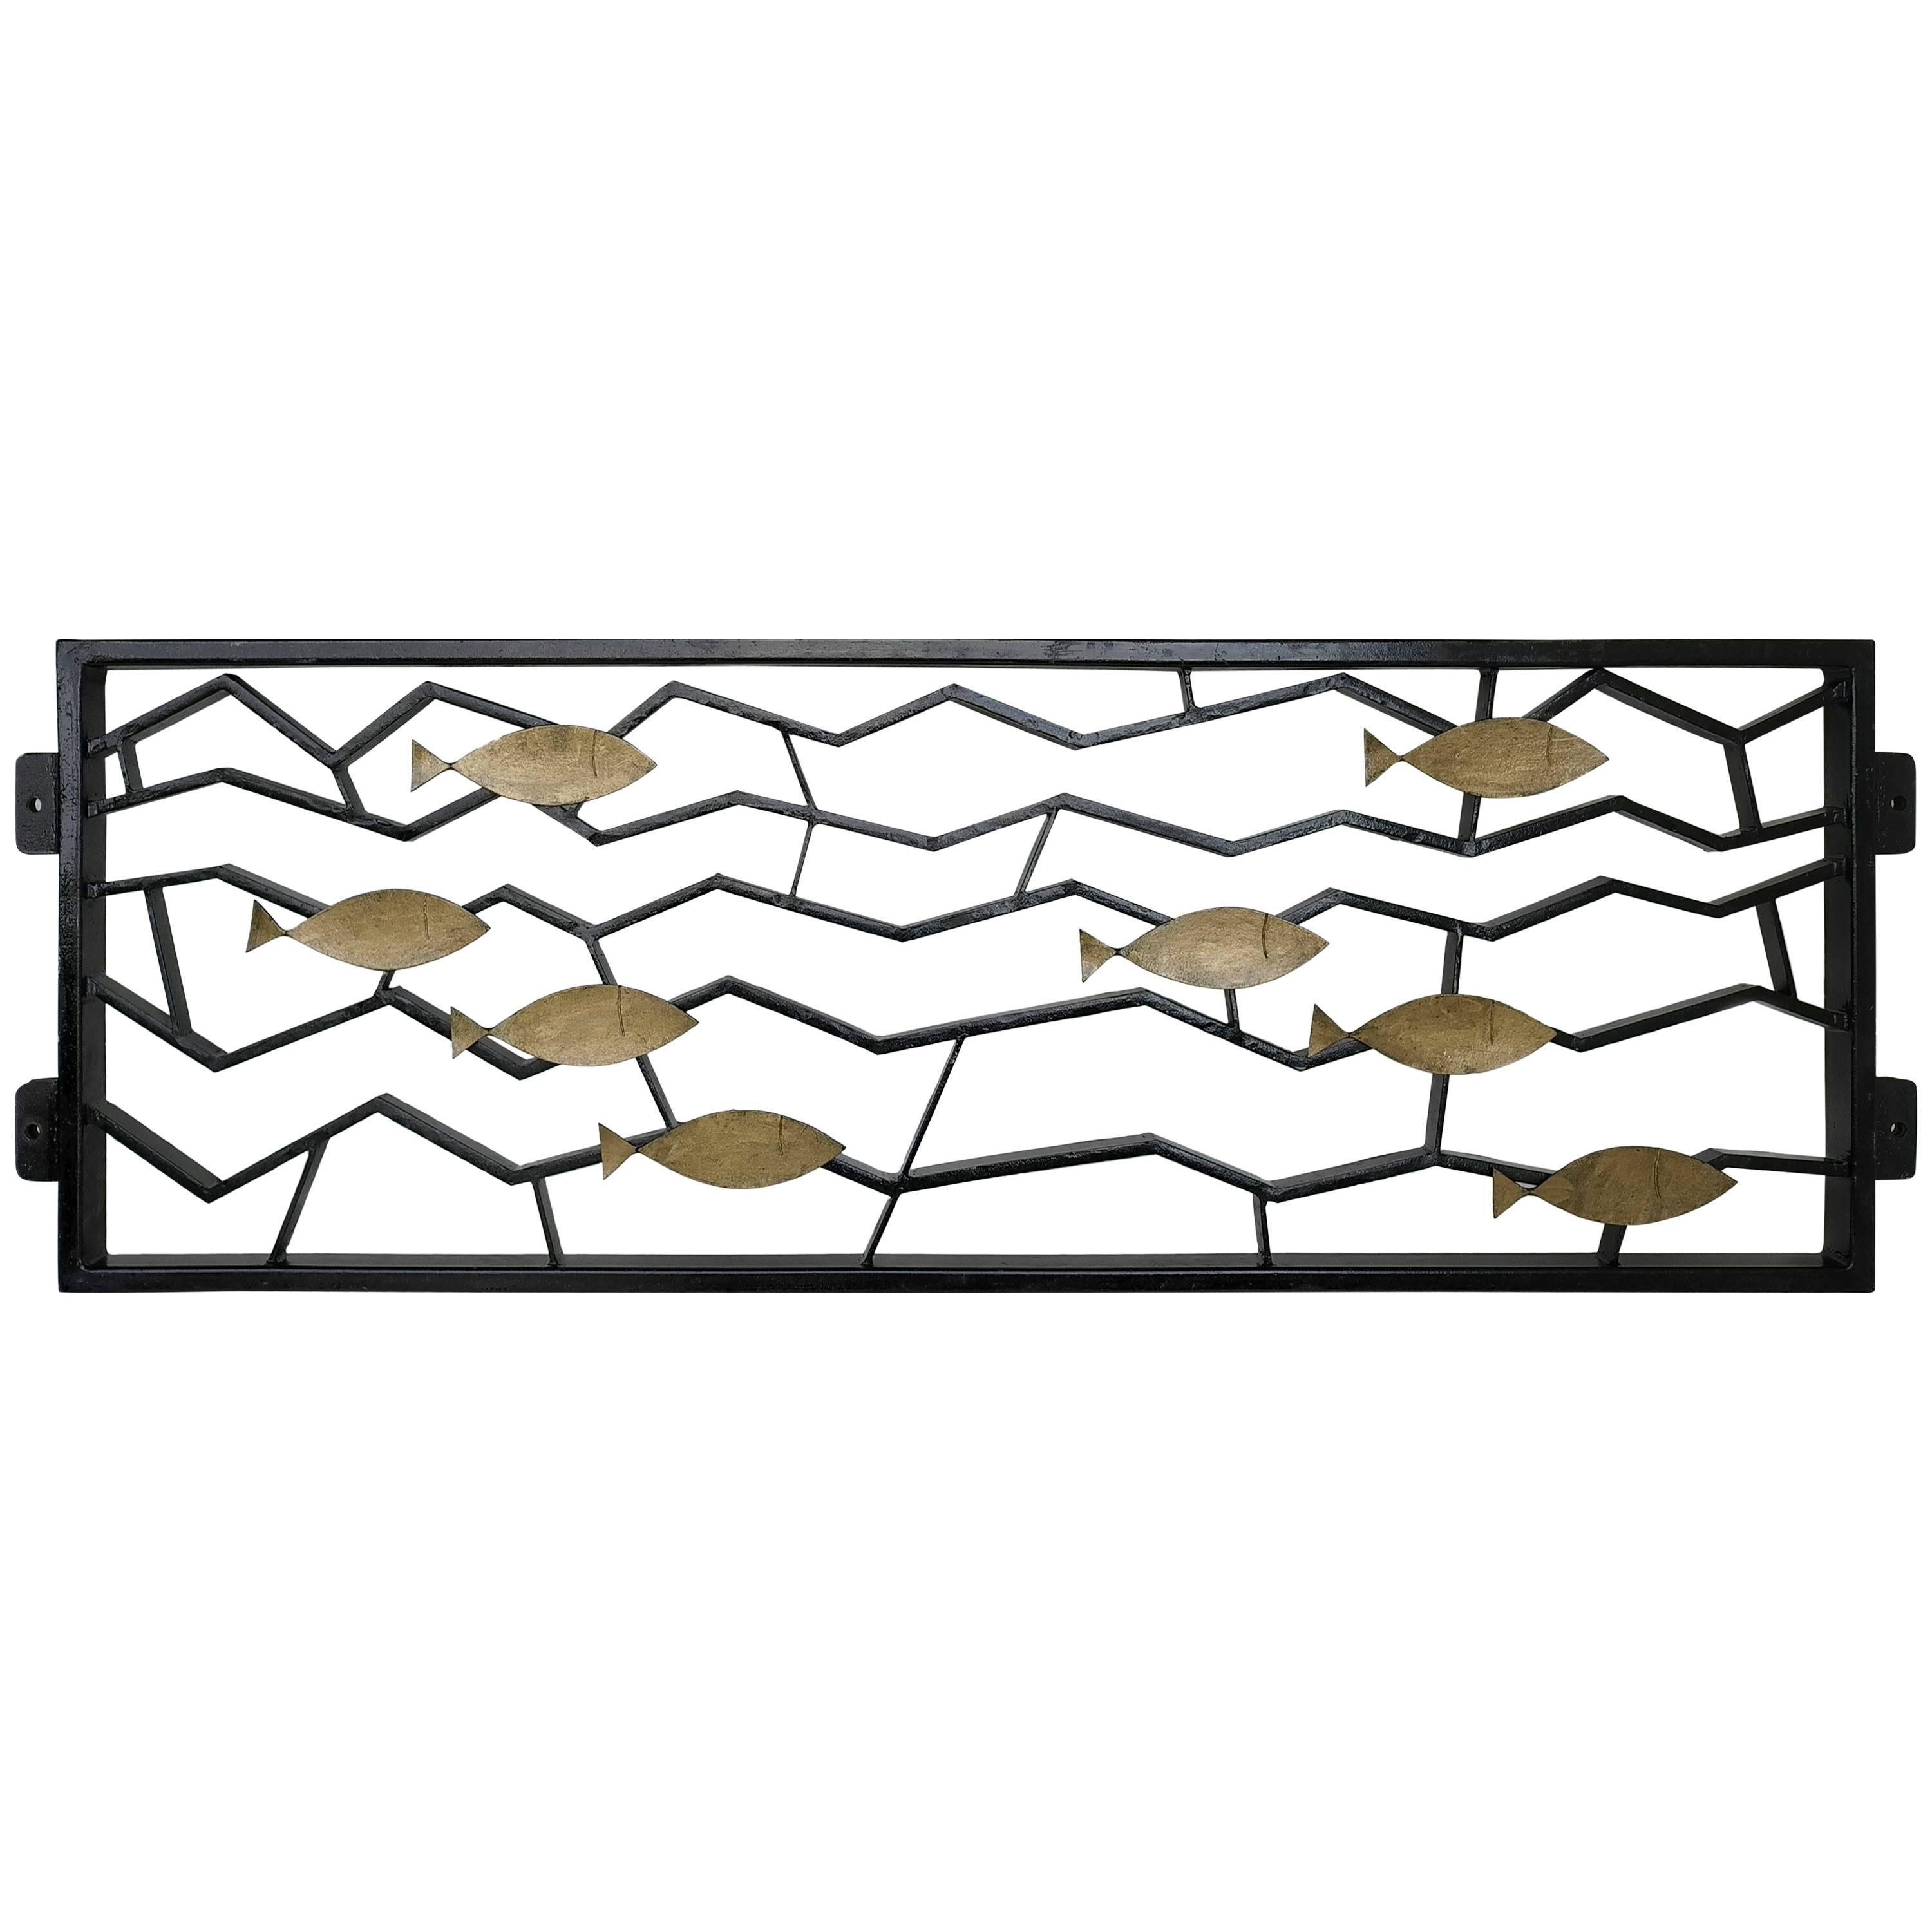 Pair of Metal Geometric Fence or Art Object with Golden Fish For Sale